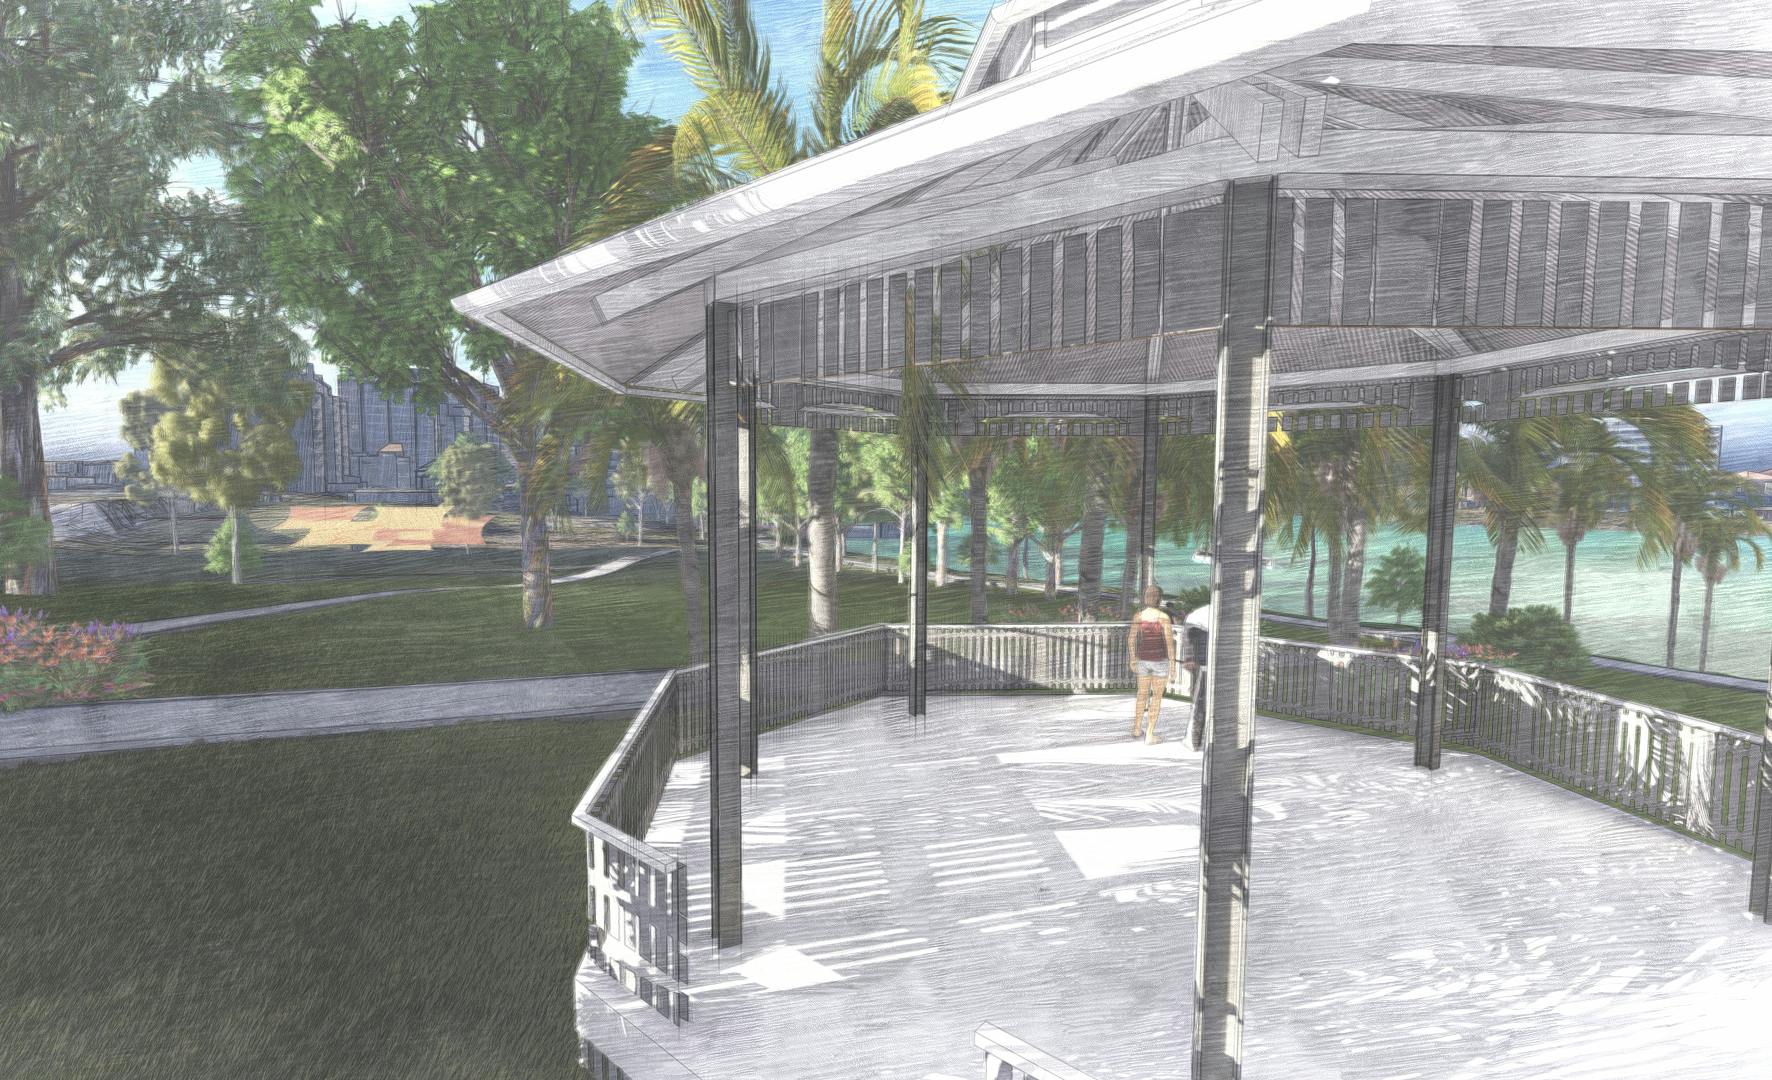 Artist's impression of the proposed bandstand